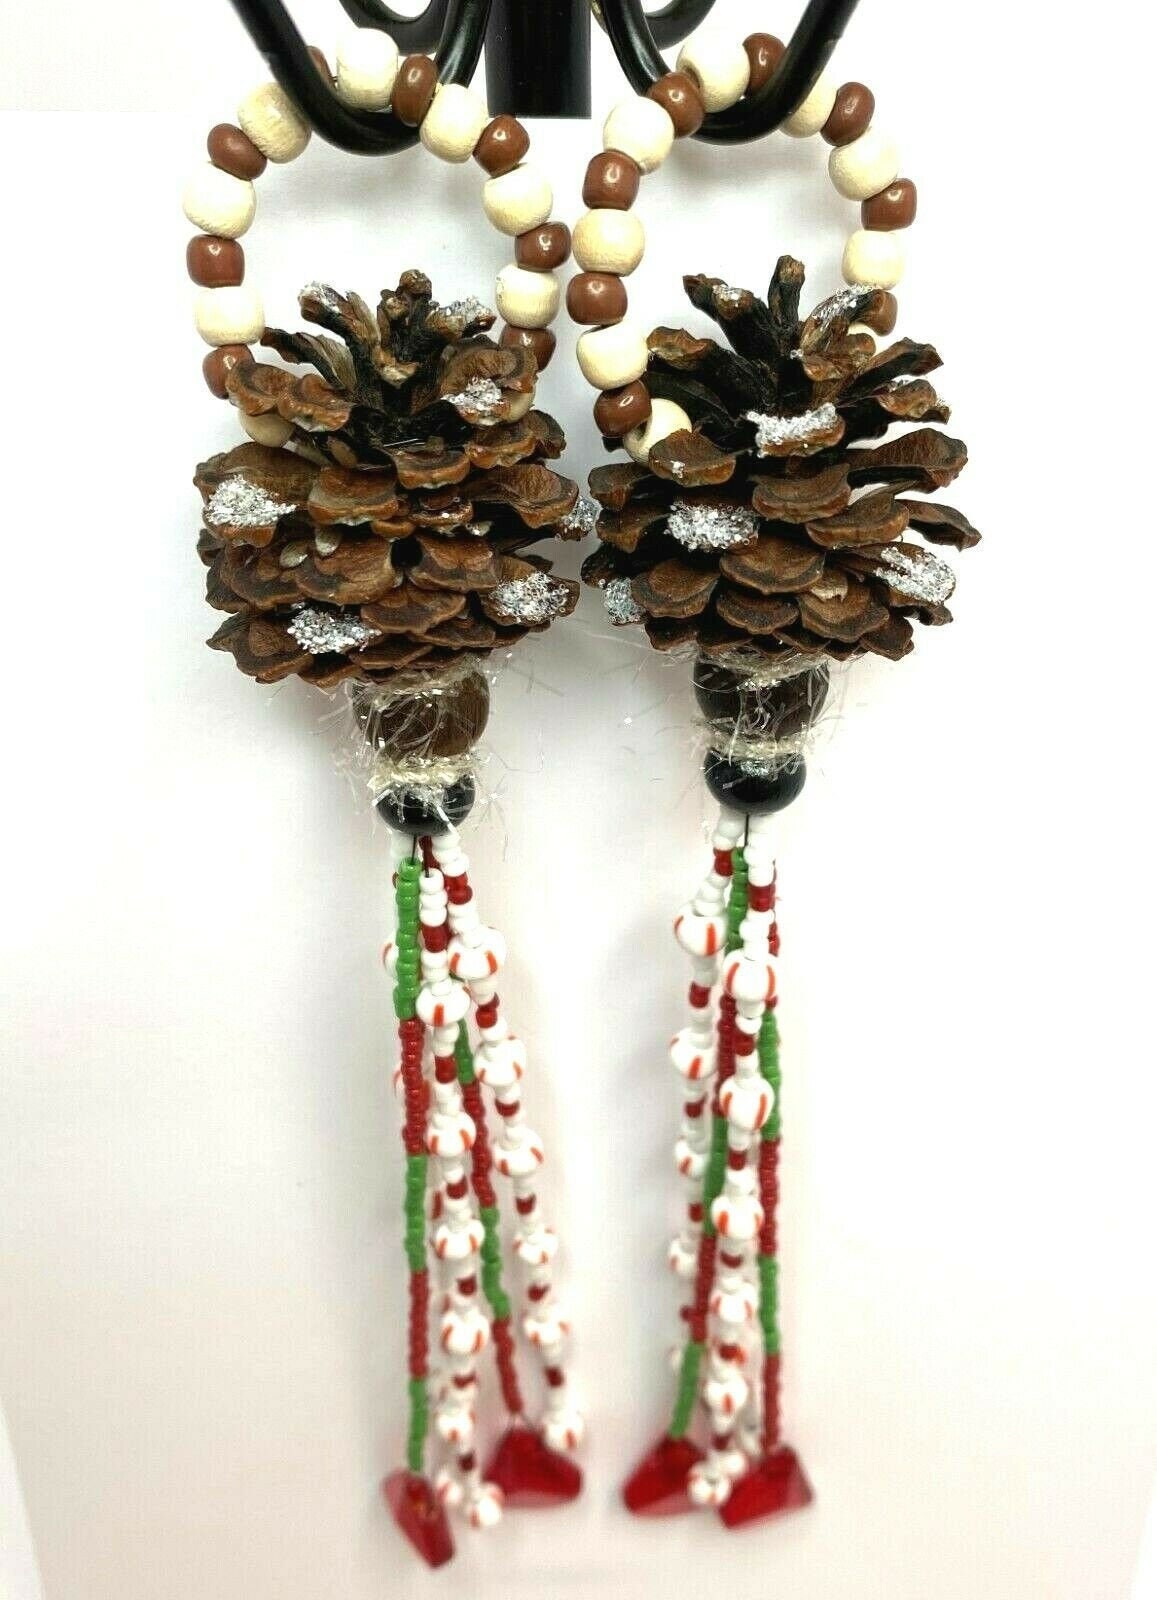 Handmade Christmas Pinecone Ornaments With Glass Teardrop Beads Tassels, Glitter, Hanpainted, Decorated Pinecone Set. Unique Handmade.